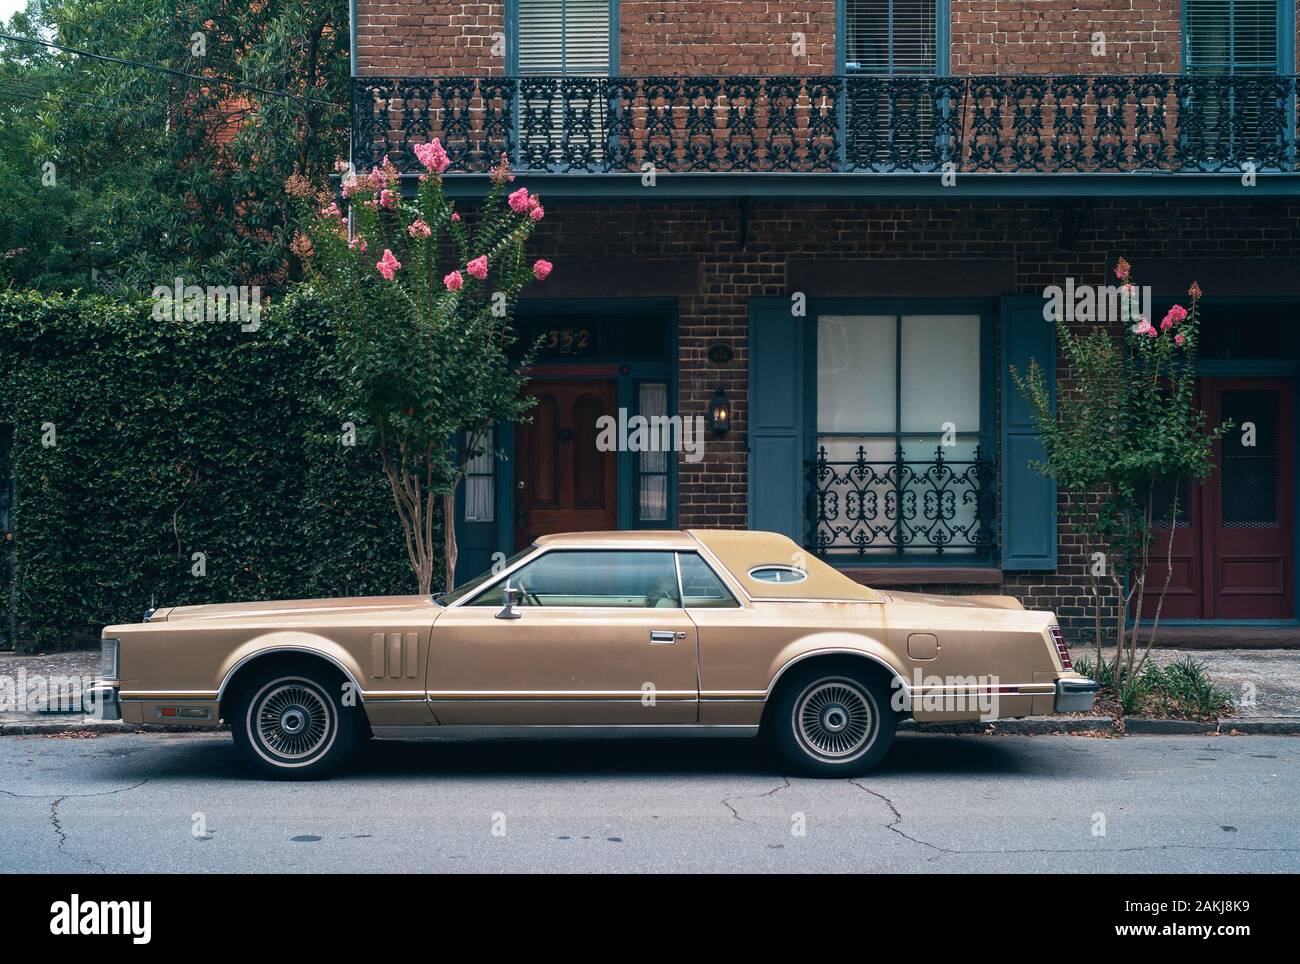 Savannah, Georgia - July 17 2012: Lincoln Mark V Car Parked in front of an Elegant, Southern Old Town House. A 1970s 2-door luxury coupe buildt 1977-1 Stock Photo